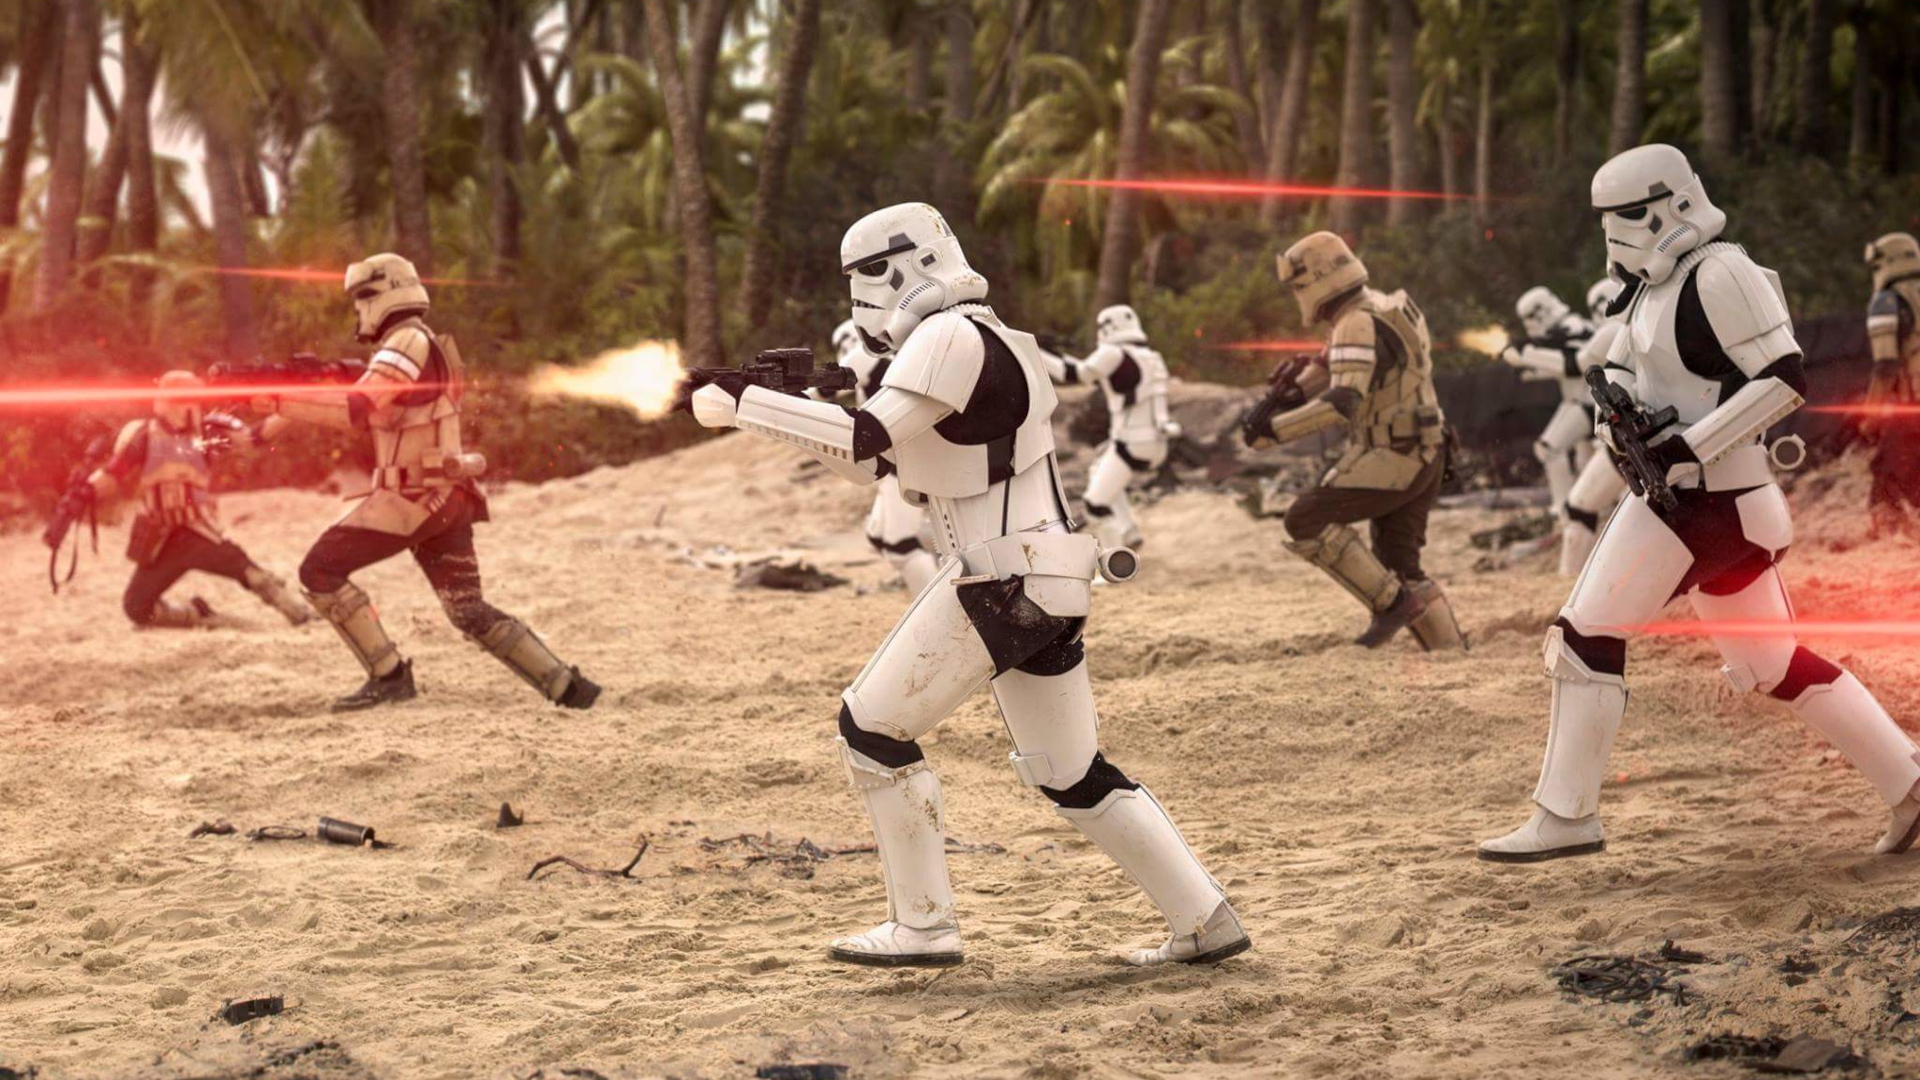 General 1920x1080 Star Wars stormtrooper Rogue One: A Star Wars Story beach battle blaster movies movie characters